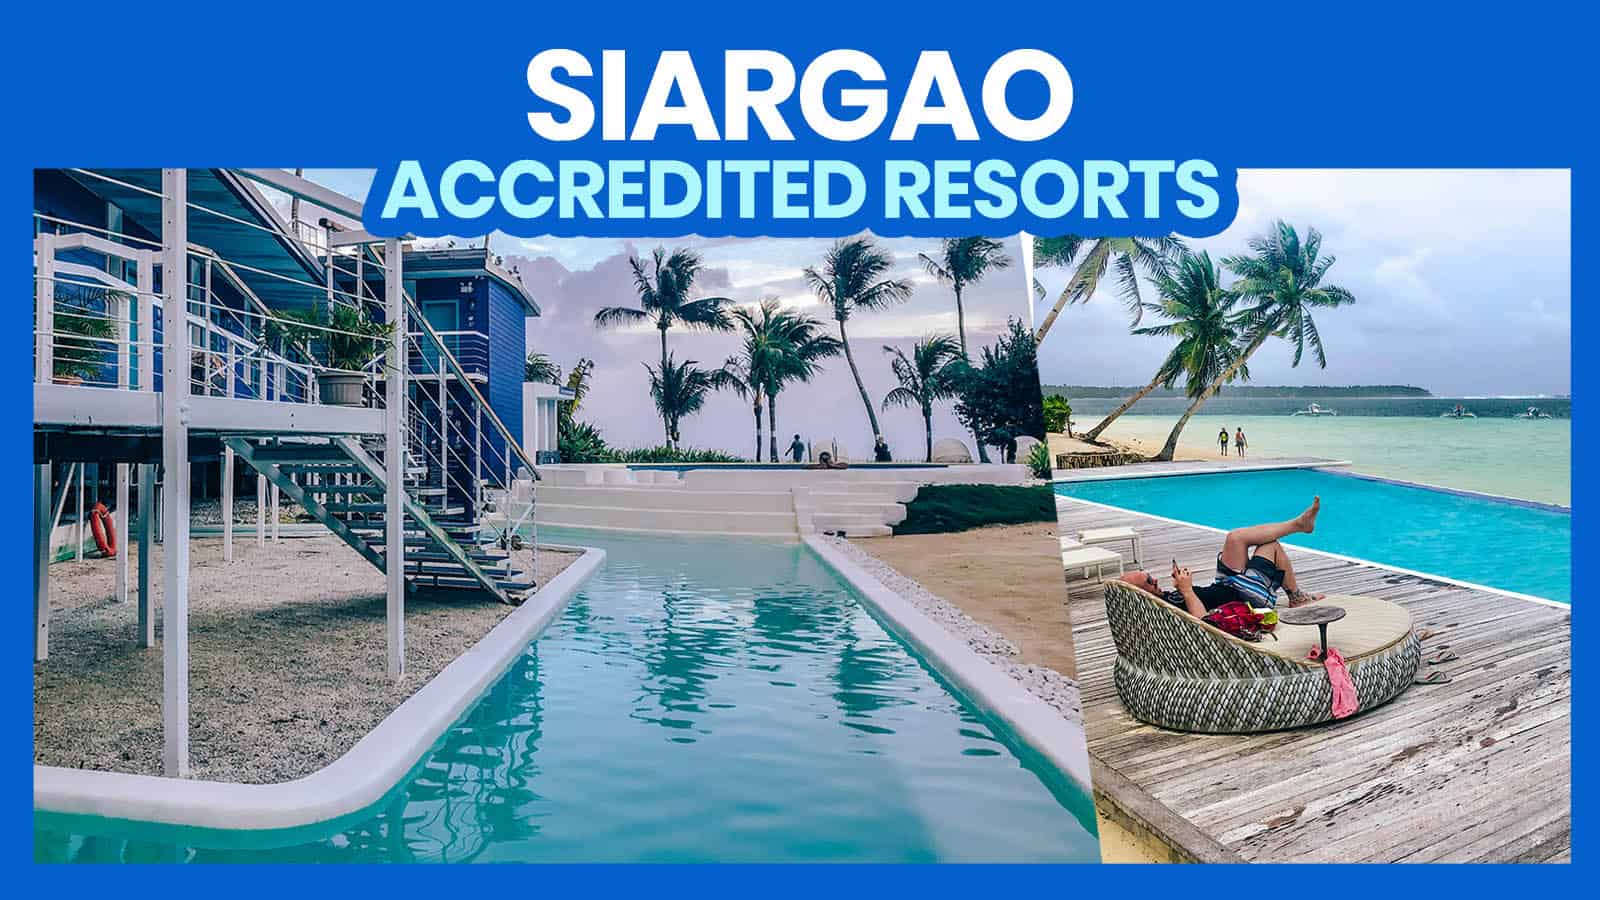 List of DOT-Accredited SIARGAO HOTELS & RESORTS